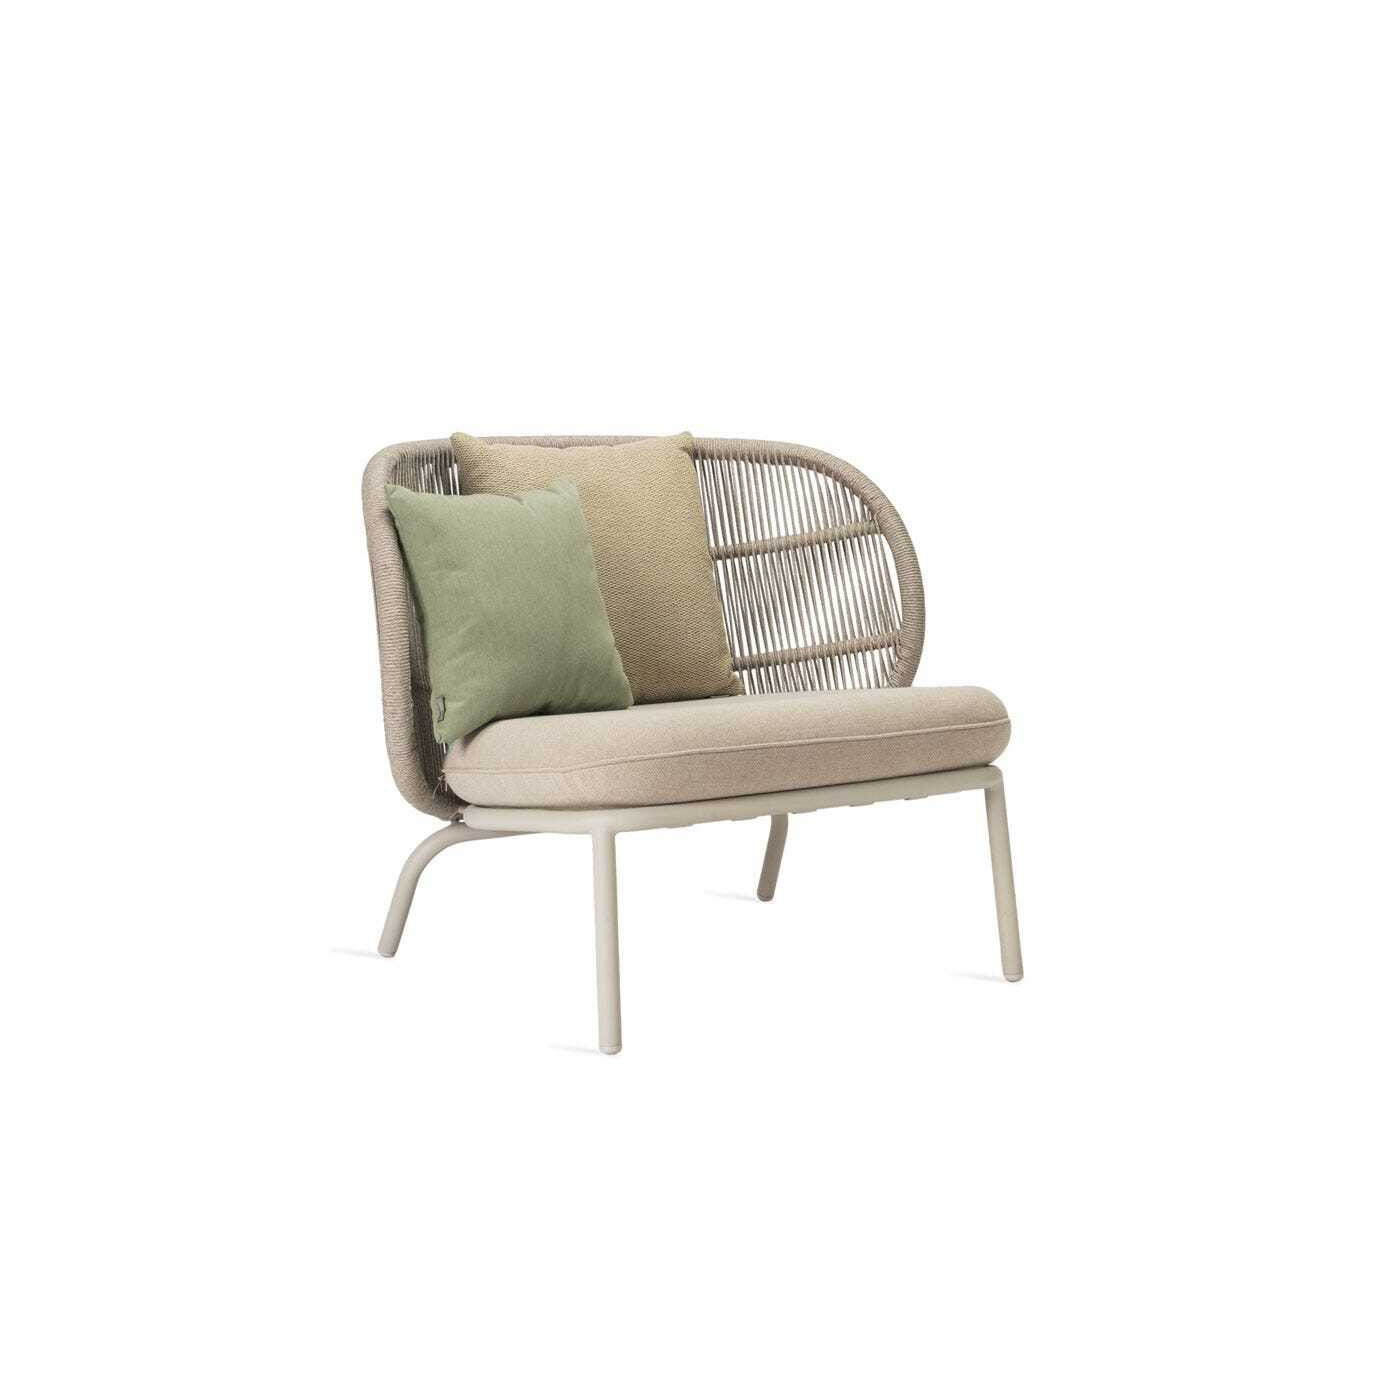 Vincent Sheppard Kodo Outdoor Lounge Chair Dune White Olive and Kiwi Scatter Cushions - image 1